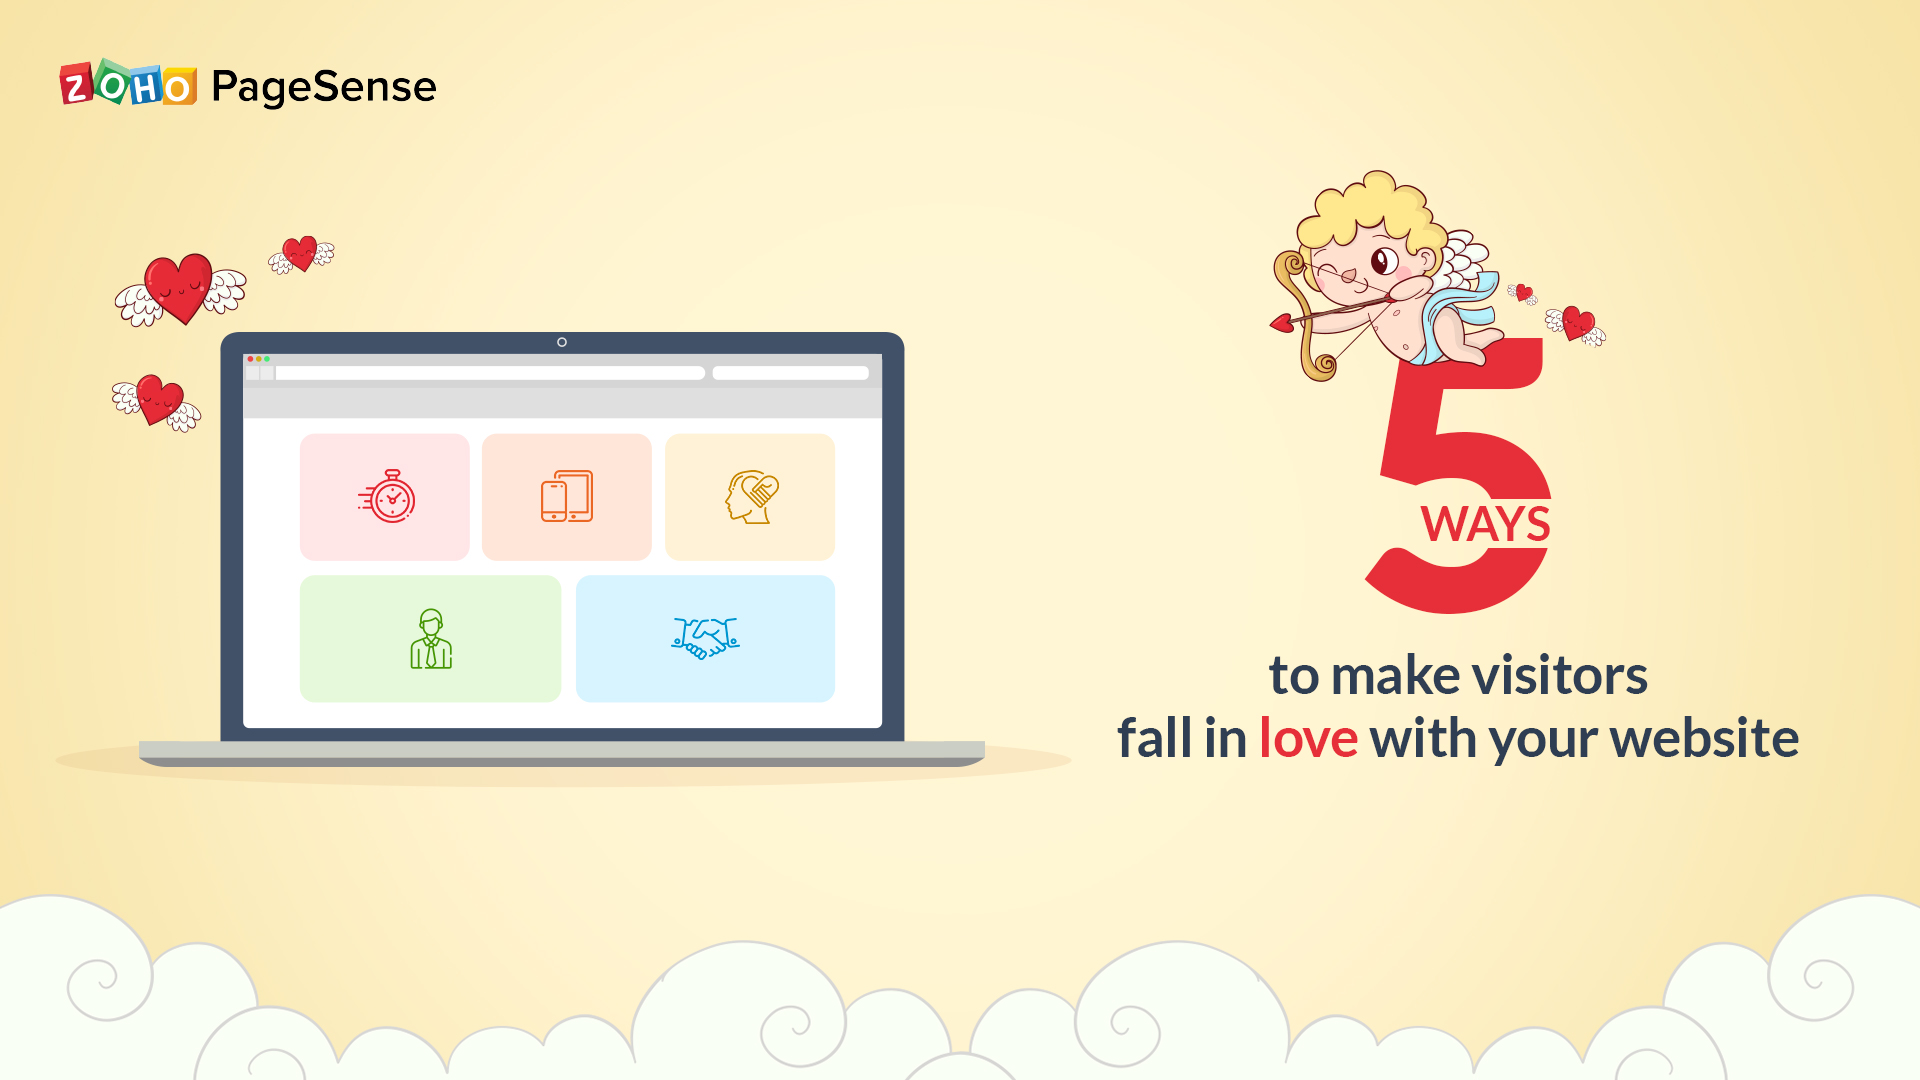 5 Ways to Make Visitors Fall in Love with Your Website 